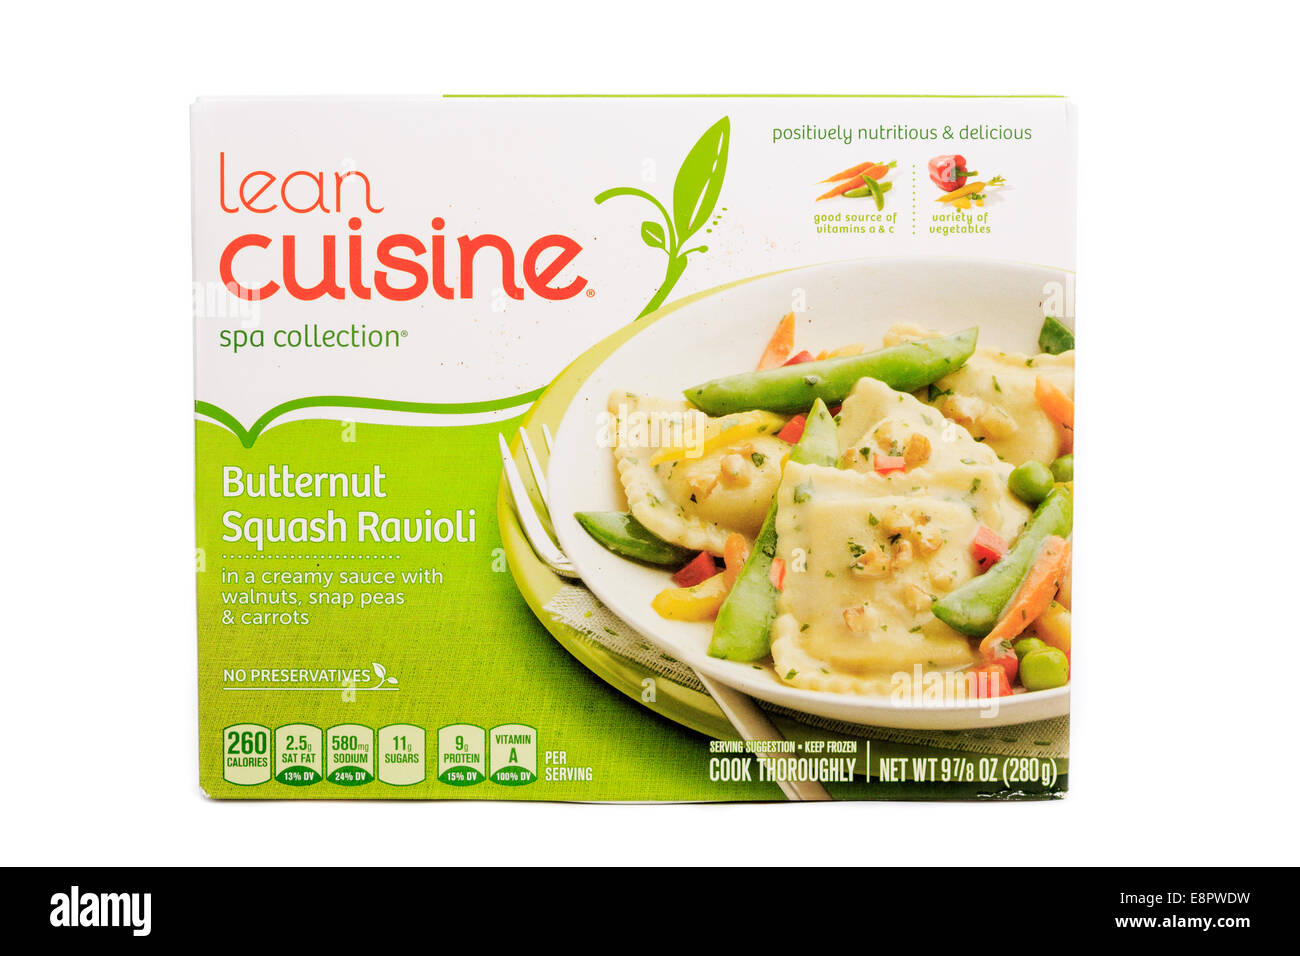 Lean Cuisine Spa Collection Butternut Squash Ravioli ready meal prepared from frozen. Stock Photo